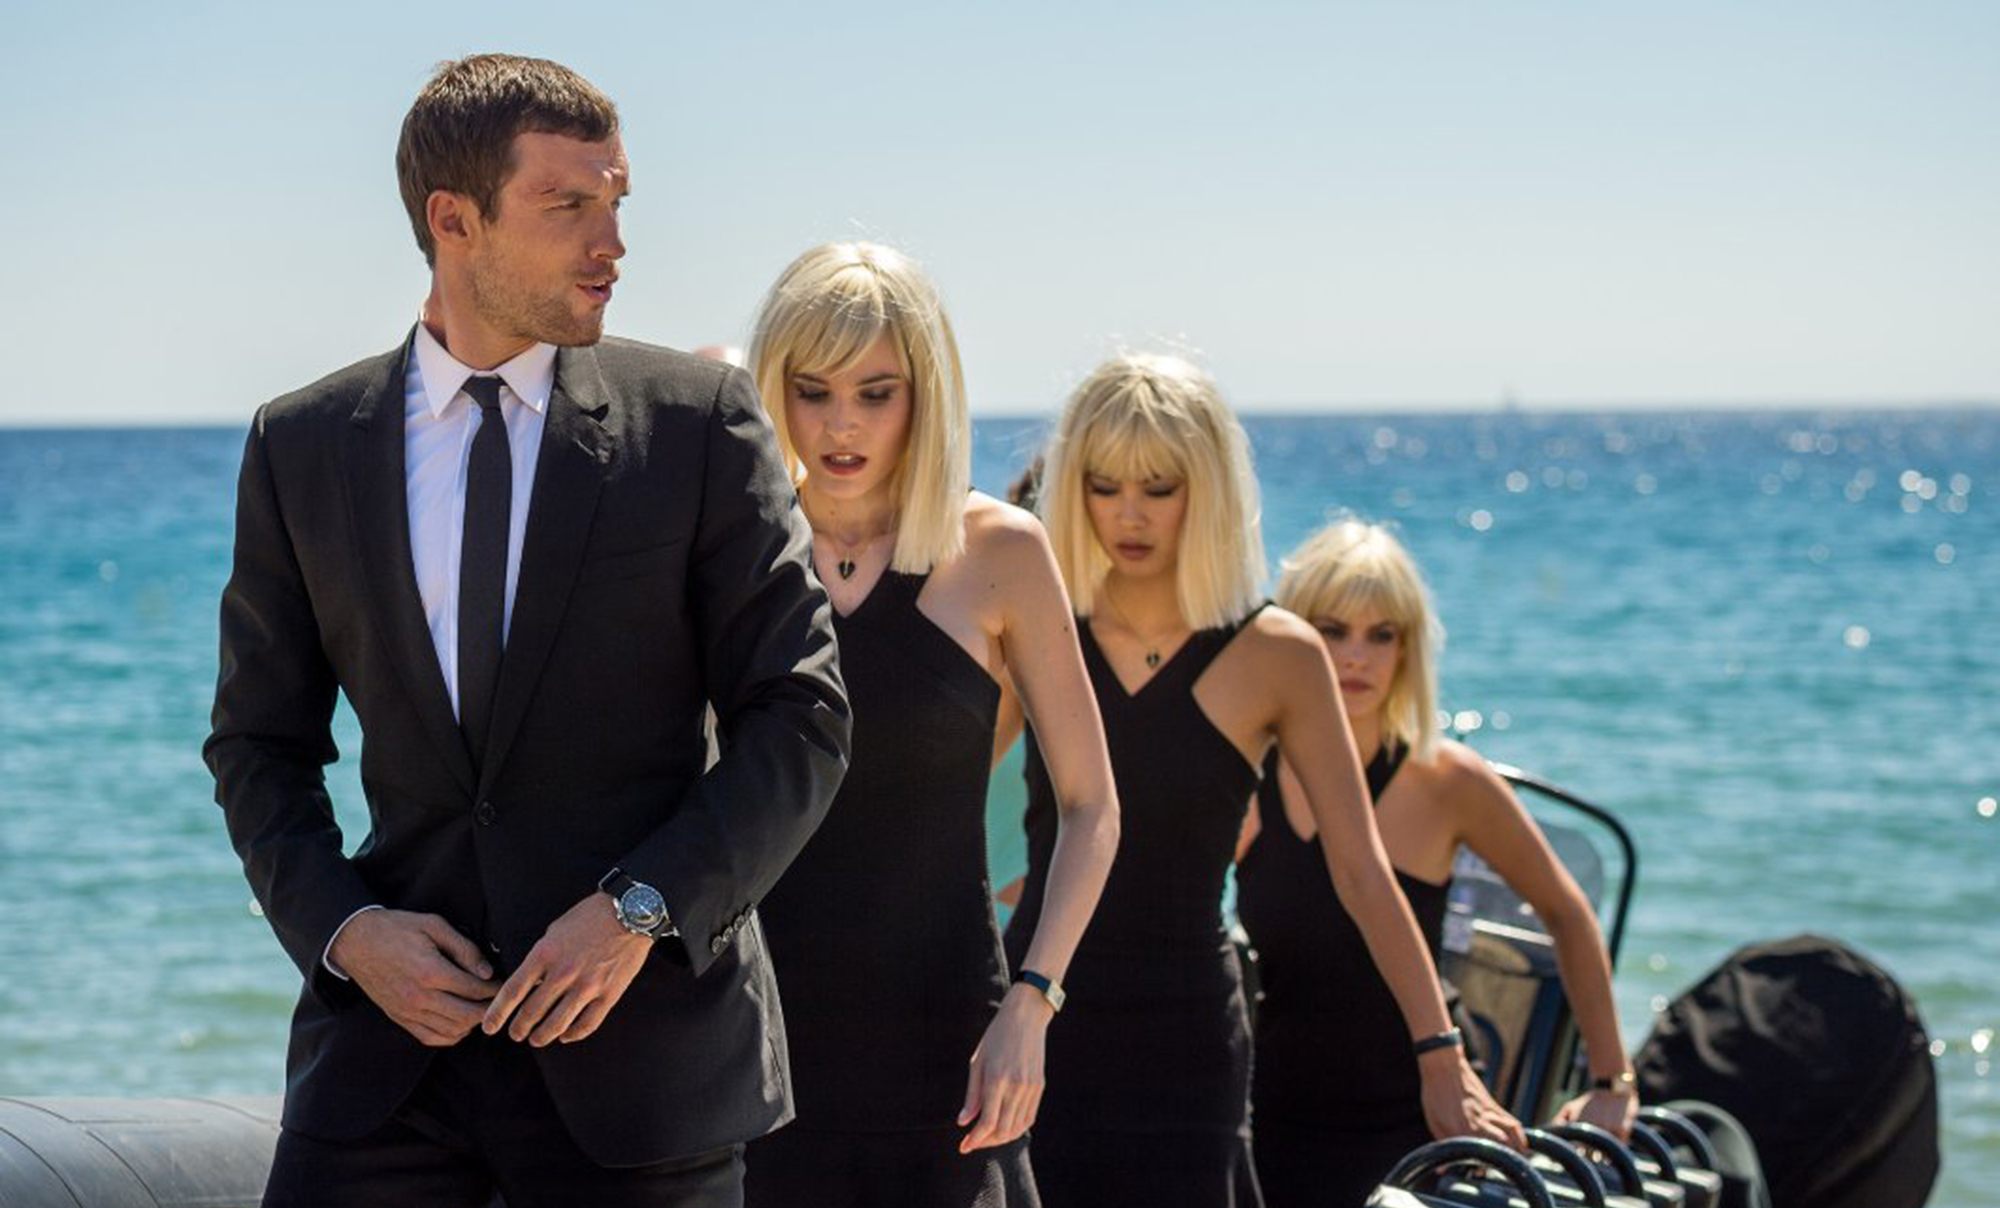 The Transporter Refueled #11